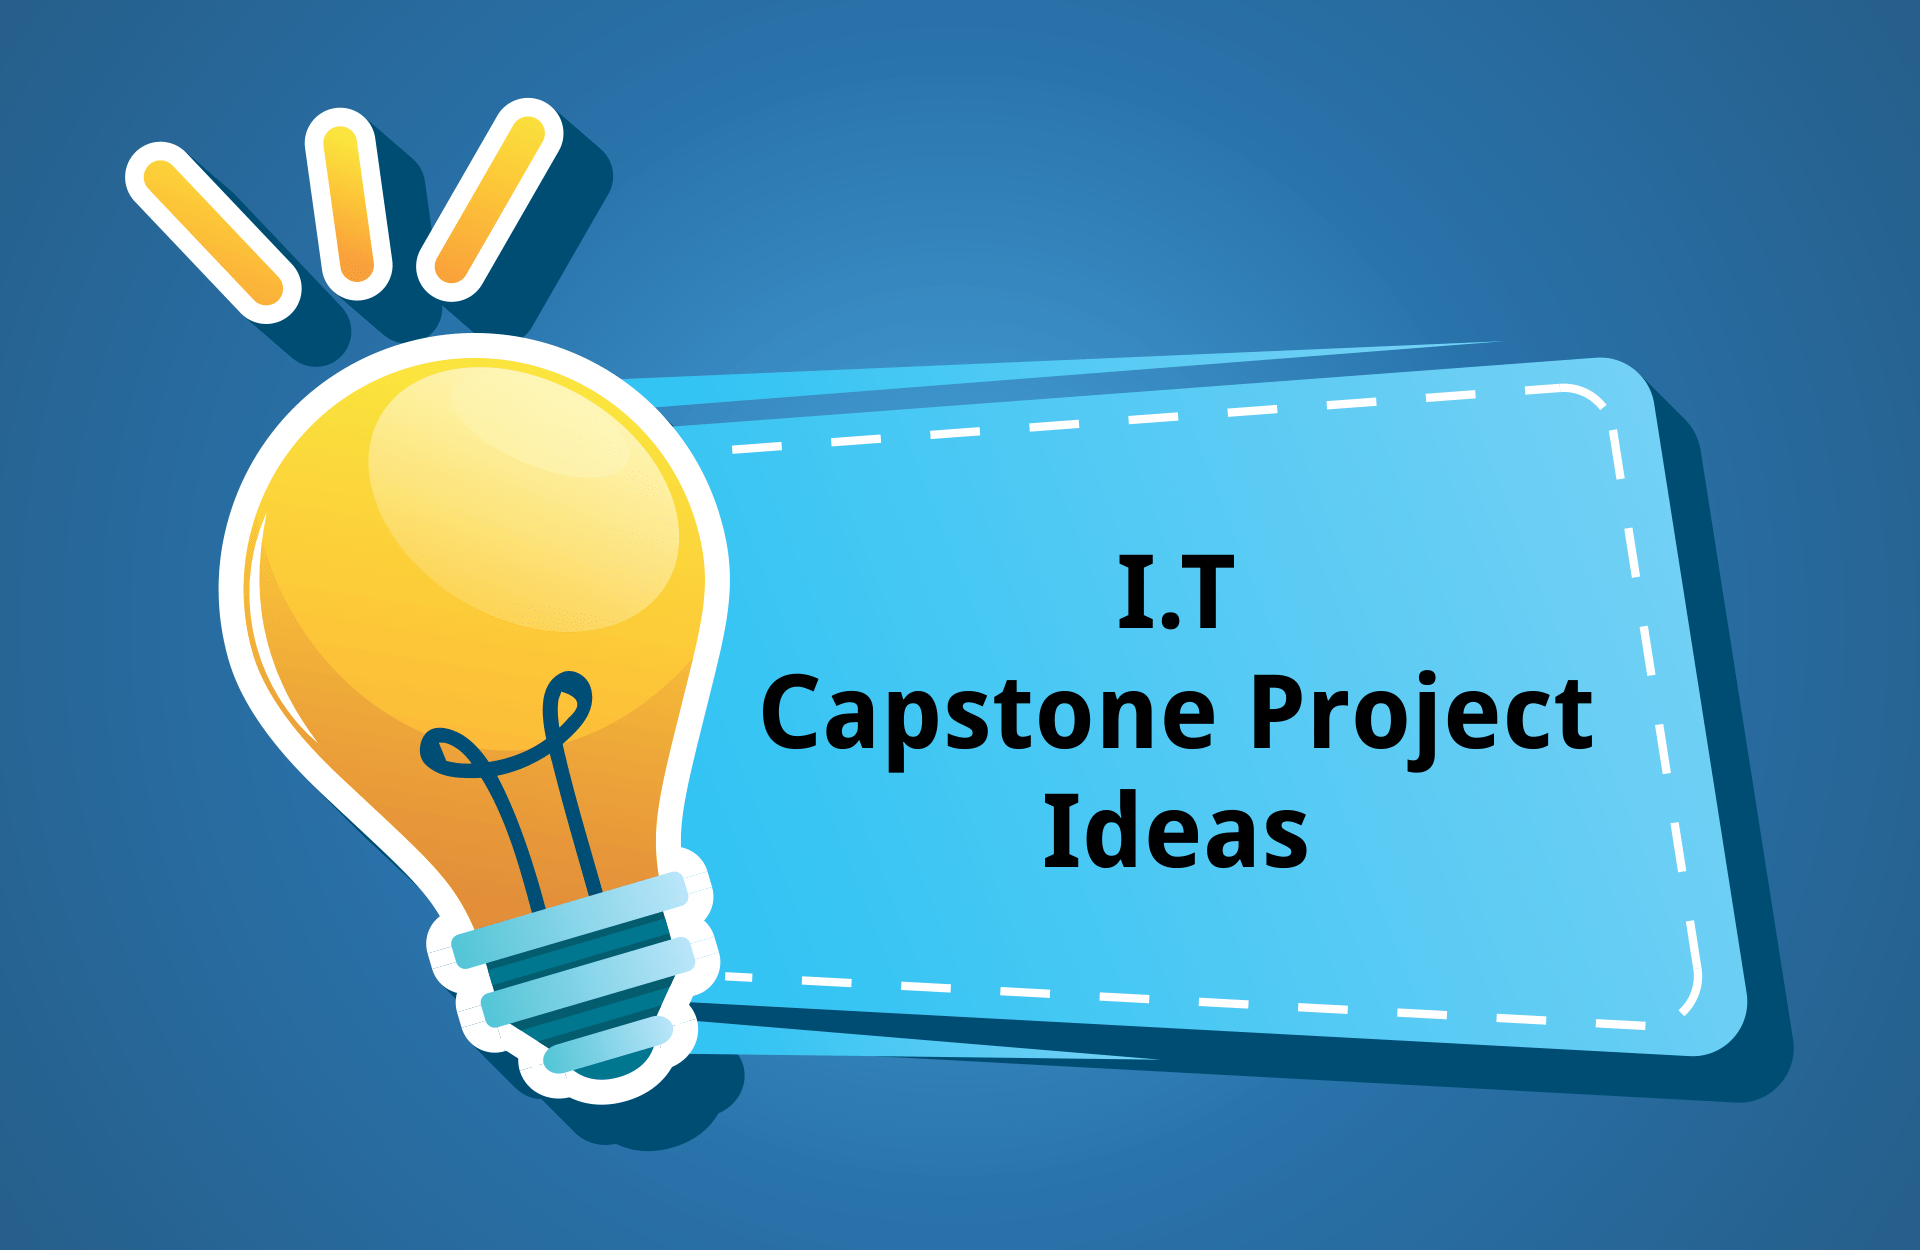 website ideas for capstone project